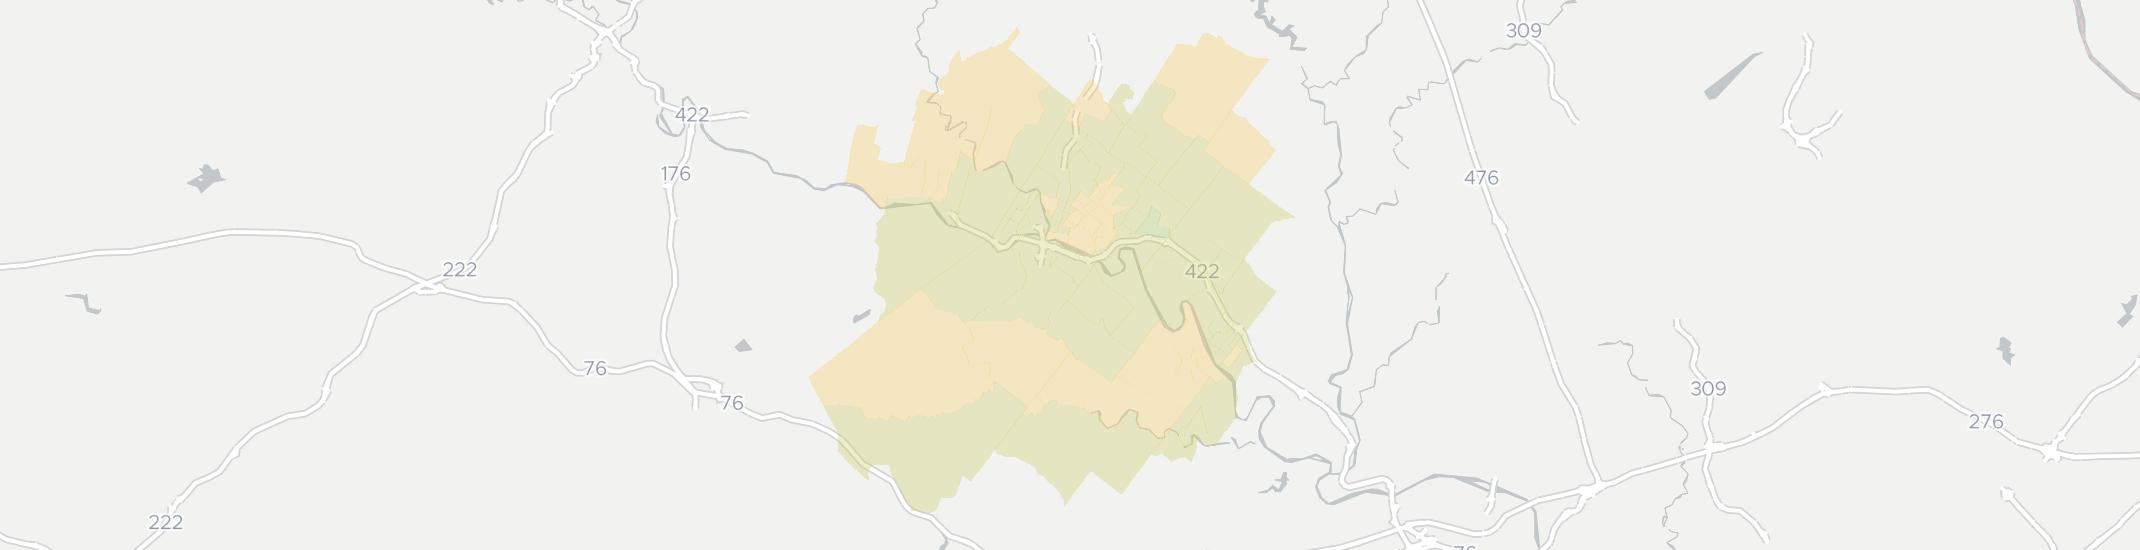 Pottstown Internet Competition Map. Click for interactive map